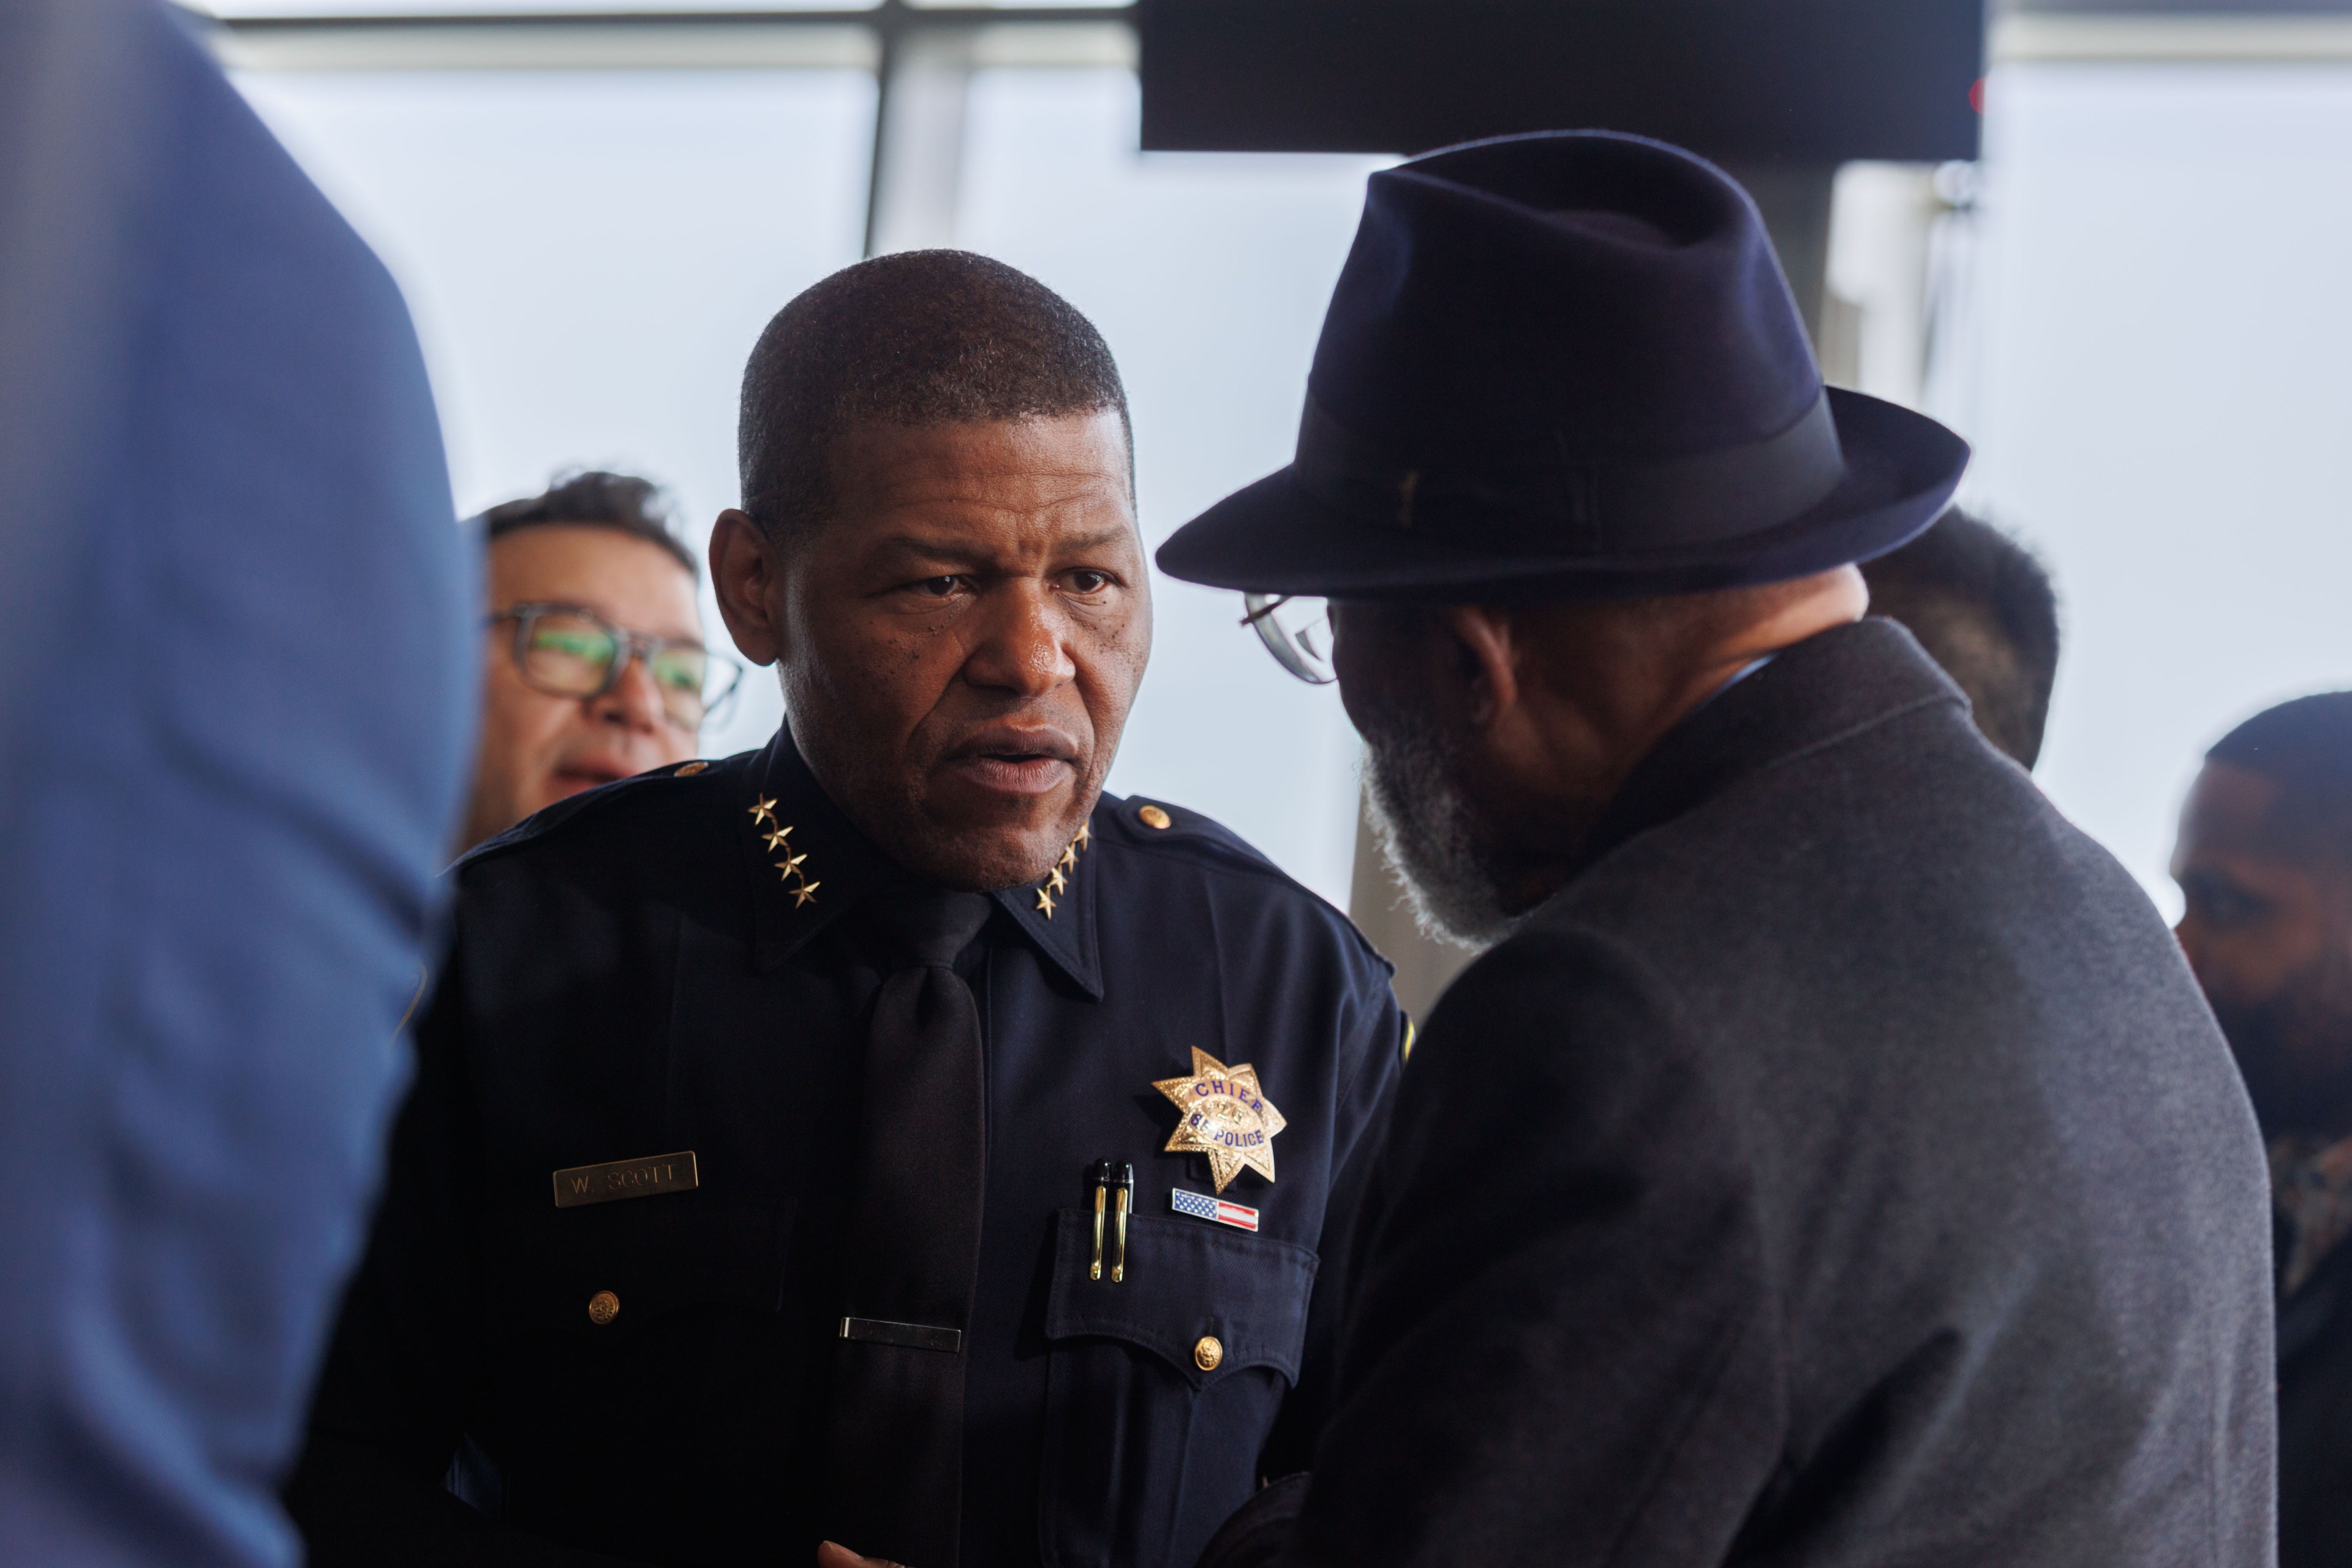 A police chief in uniform converses with a man in a black hat and coat.